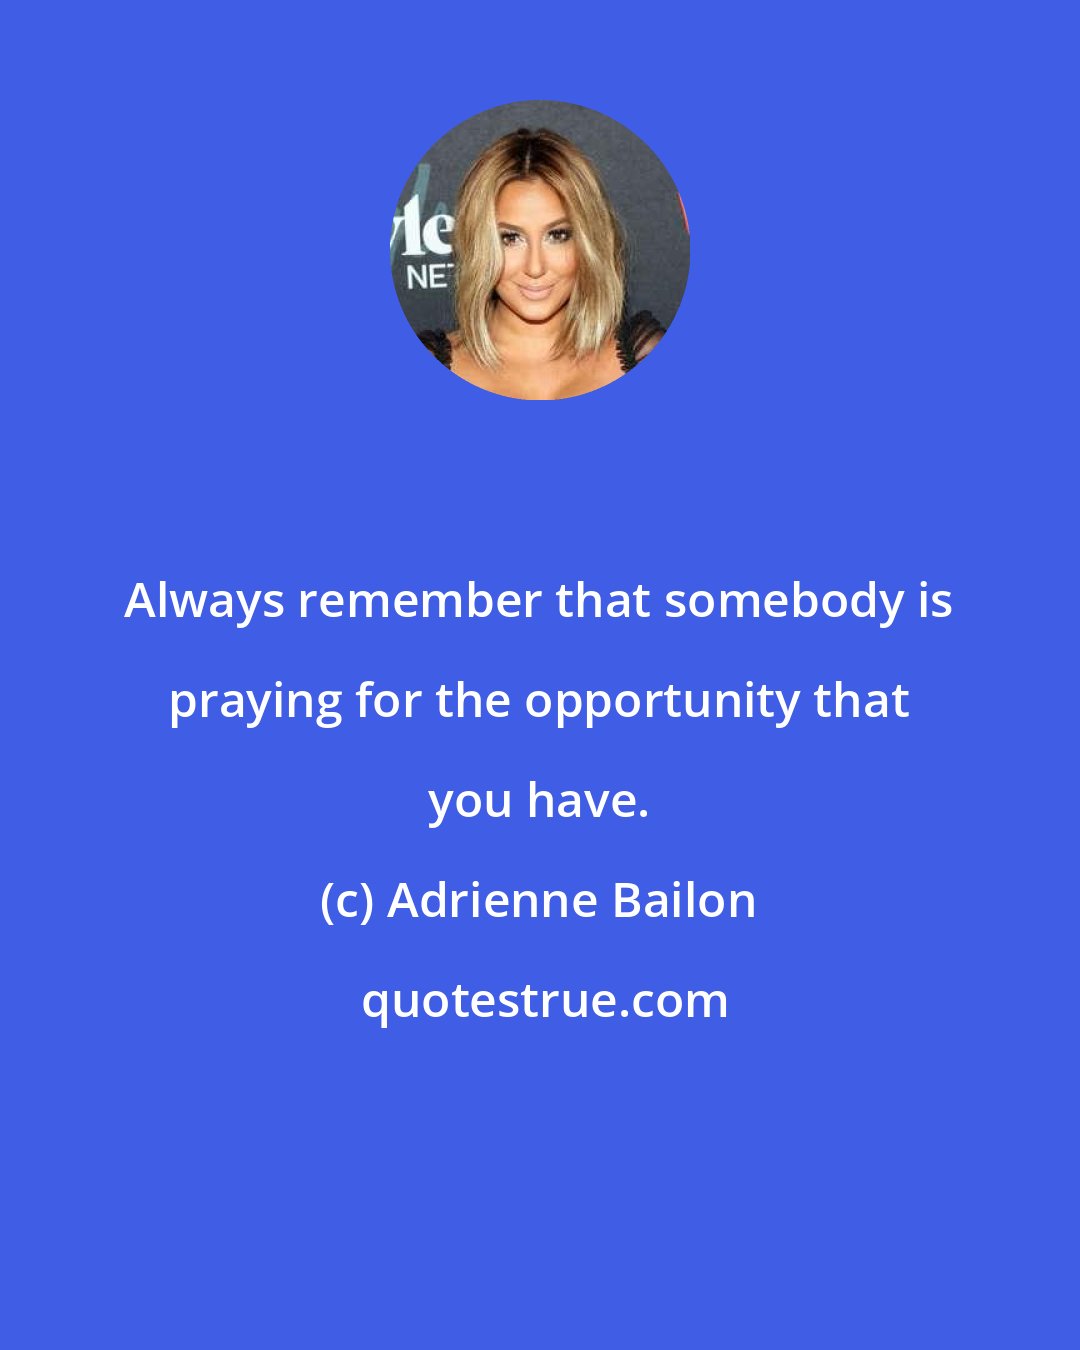 Adrienne Bailon: Always remember that somebody is praying for the opportunity that you have.